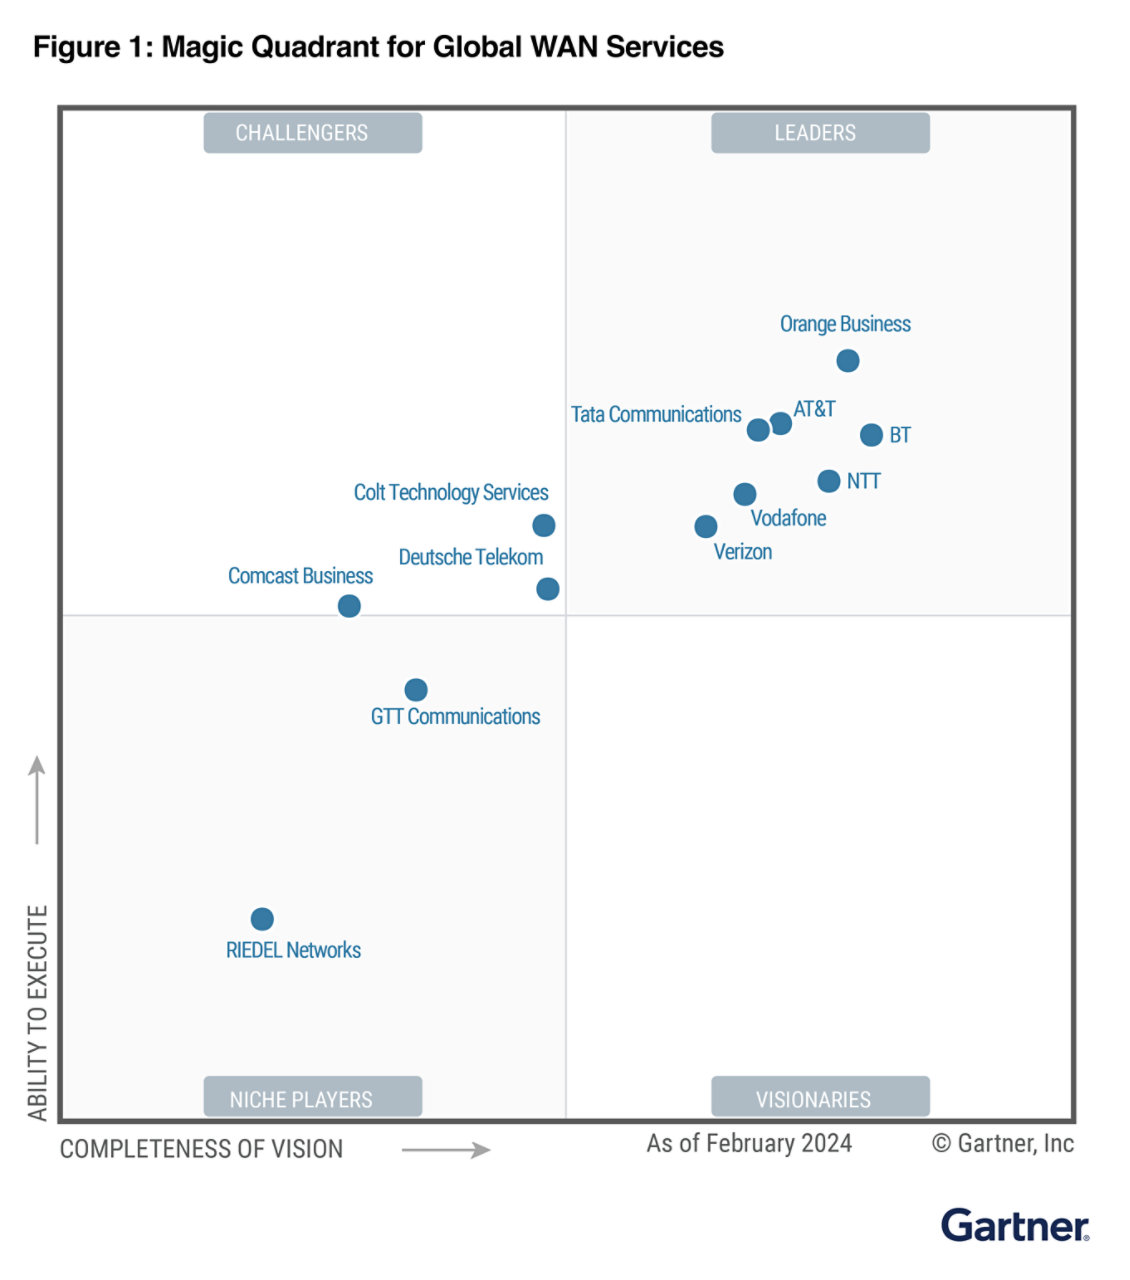 We’ve been positioned furthest for ‘Completeness of Vision’ in the 2024 Gartner® Magic Quadrant™ for Global WAN Services